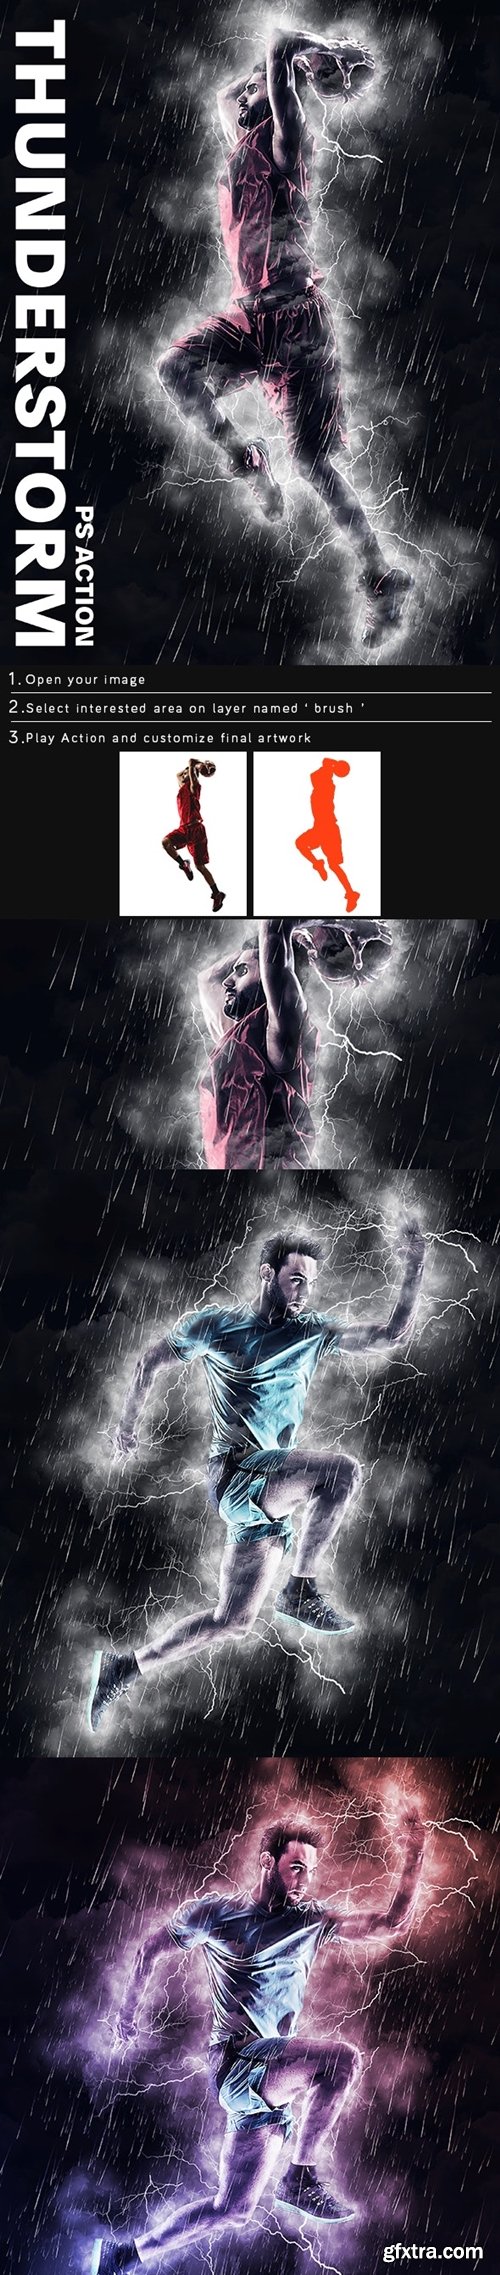 GraphicRiver - Thunderstorm Photoshop Action 25009367